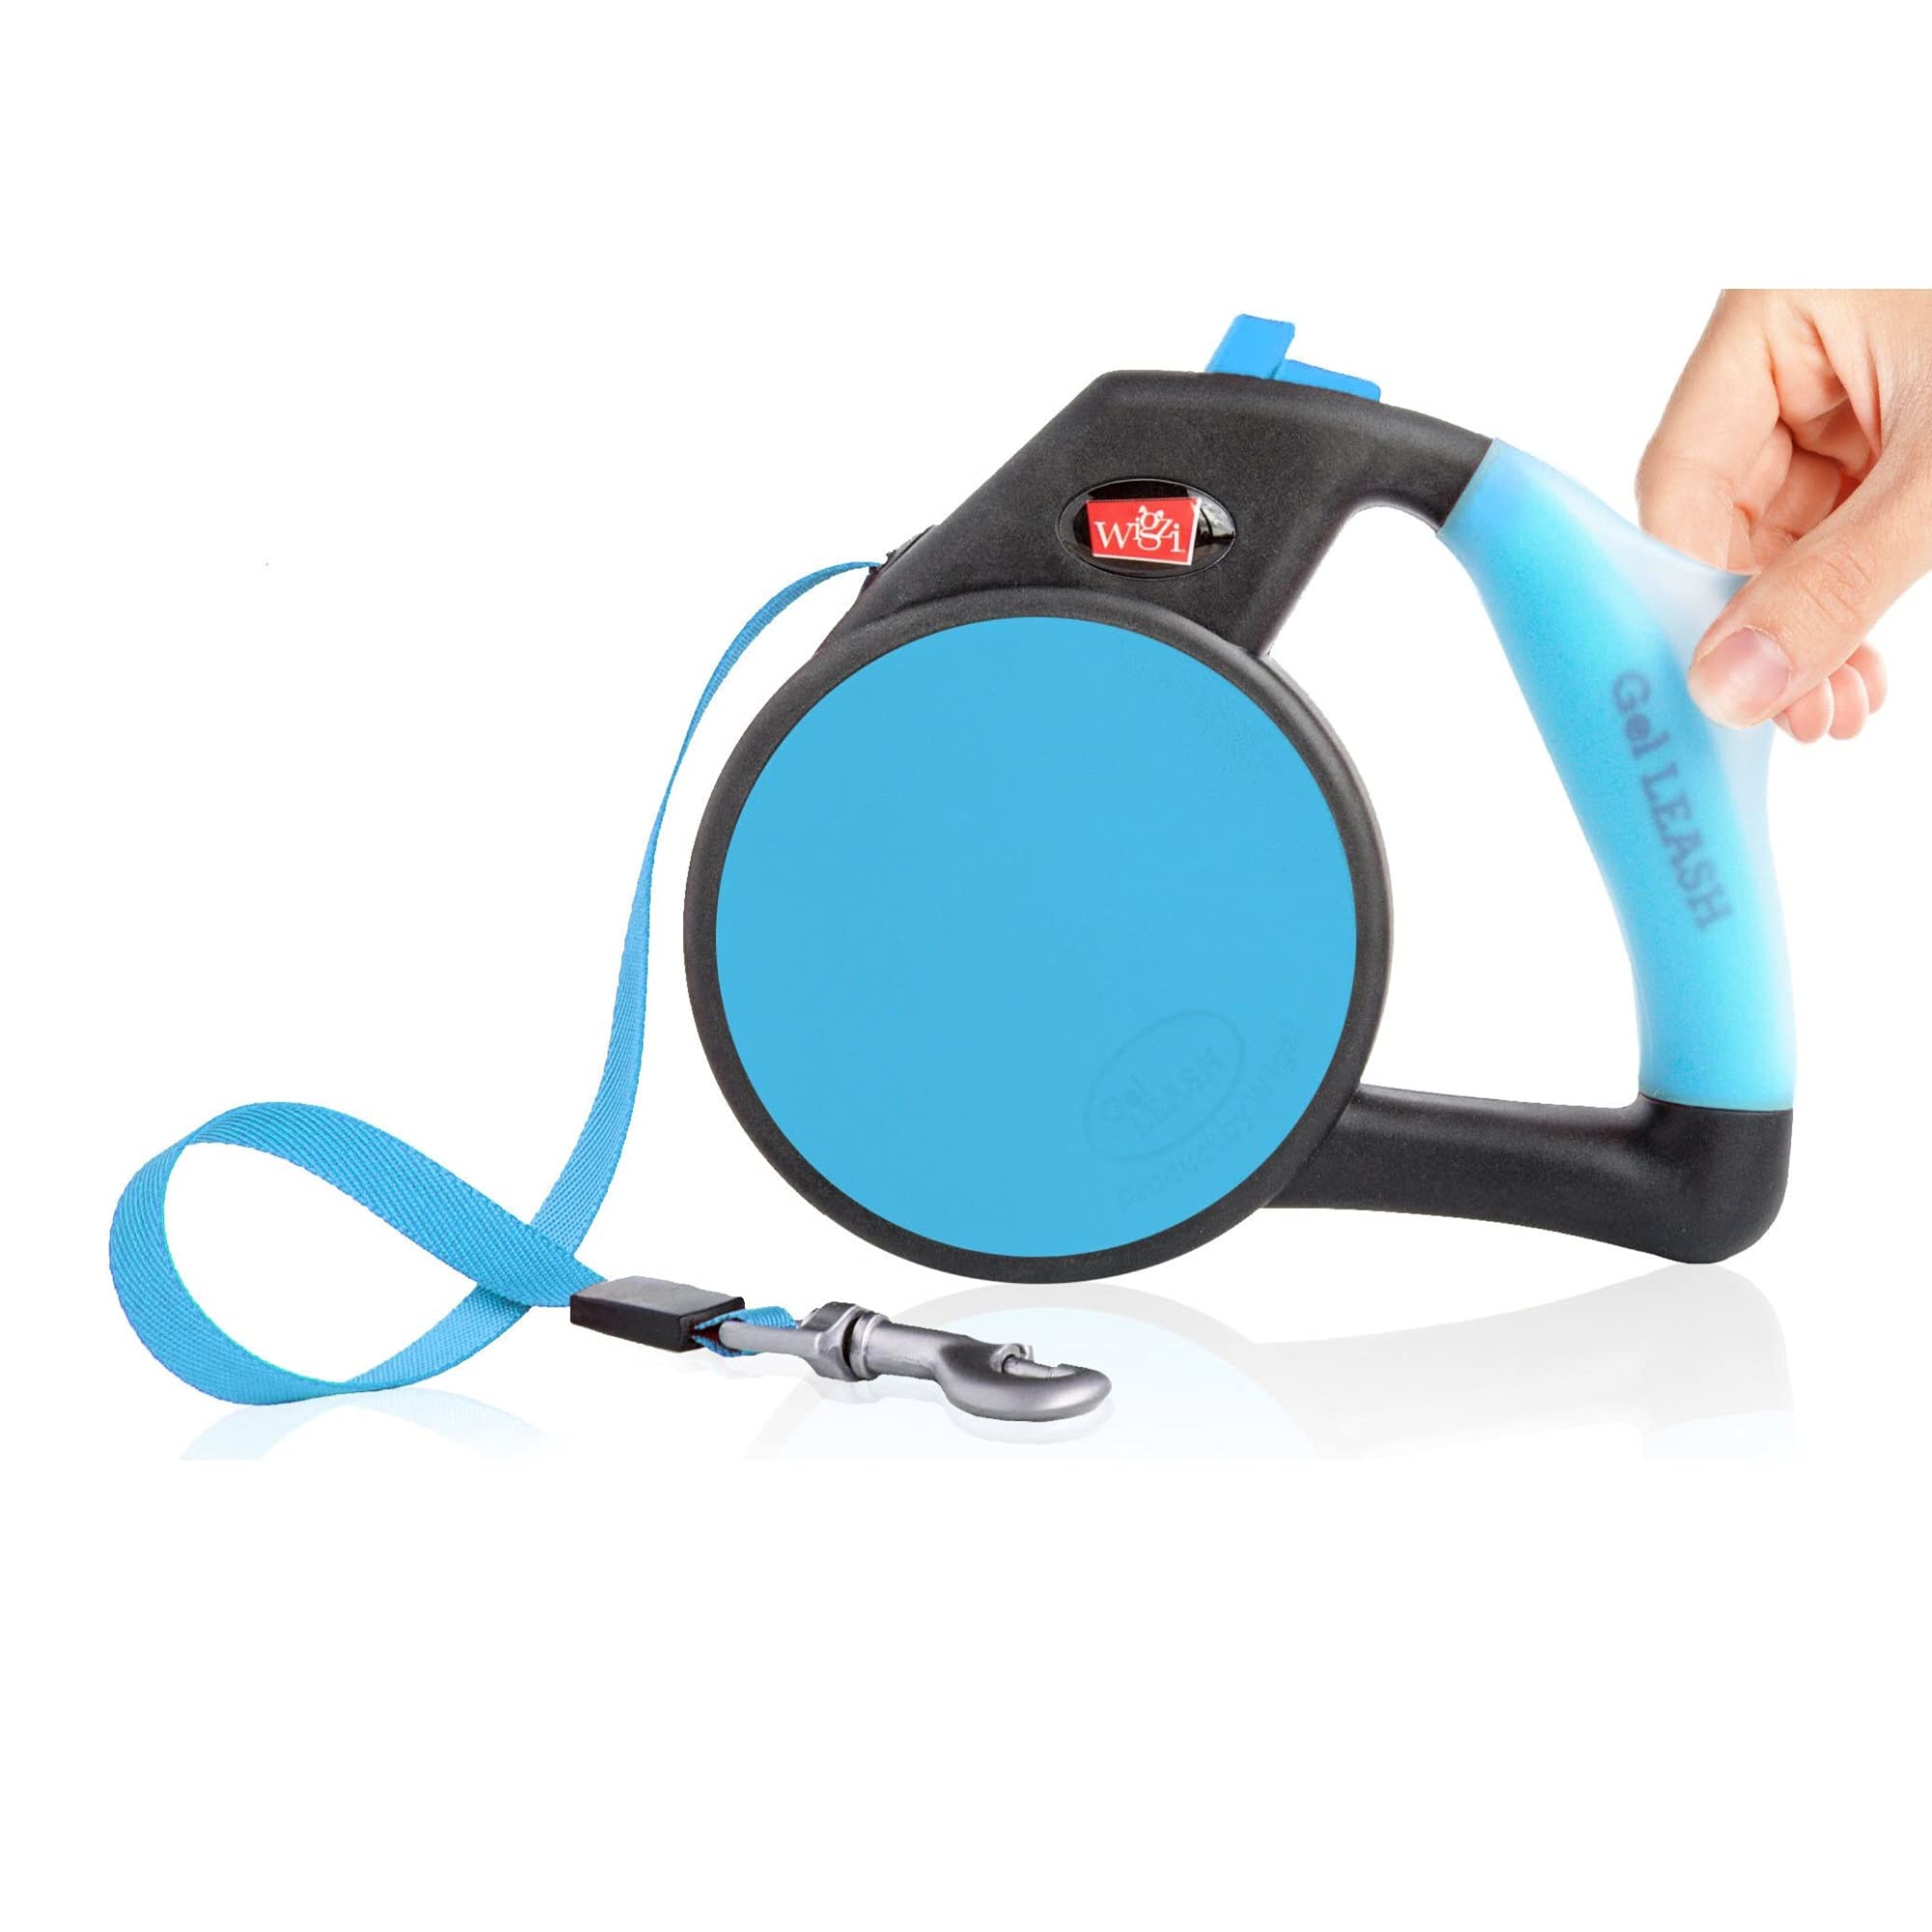 Wigzi Gel Handle Gripped Tape Retractable Nylon Dog Leash - Blue - Small - Up to 16 Feet  